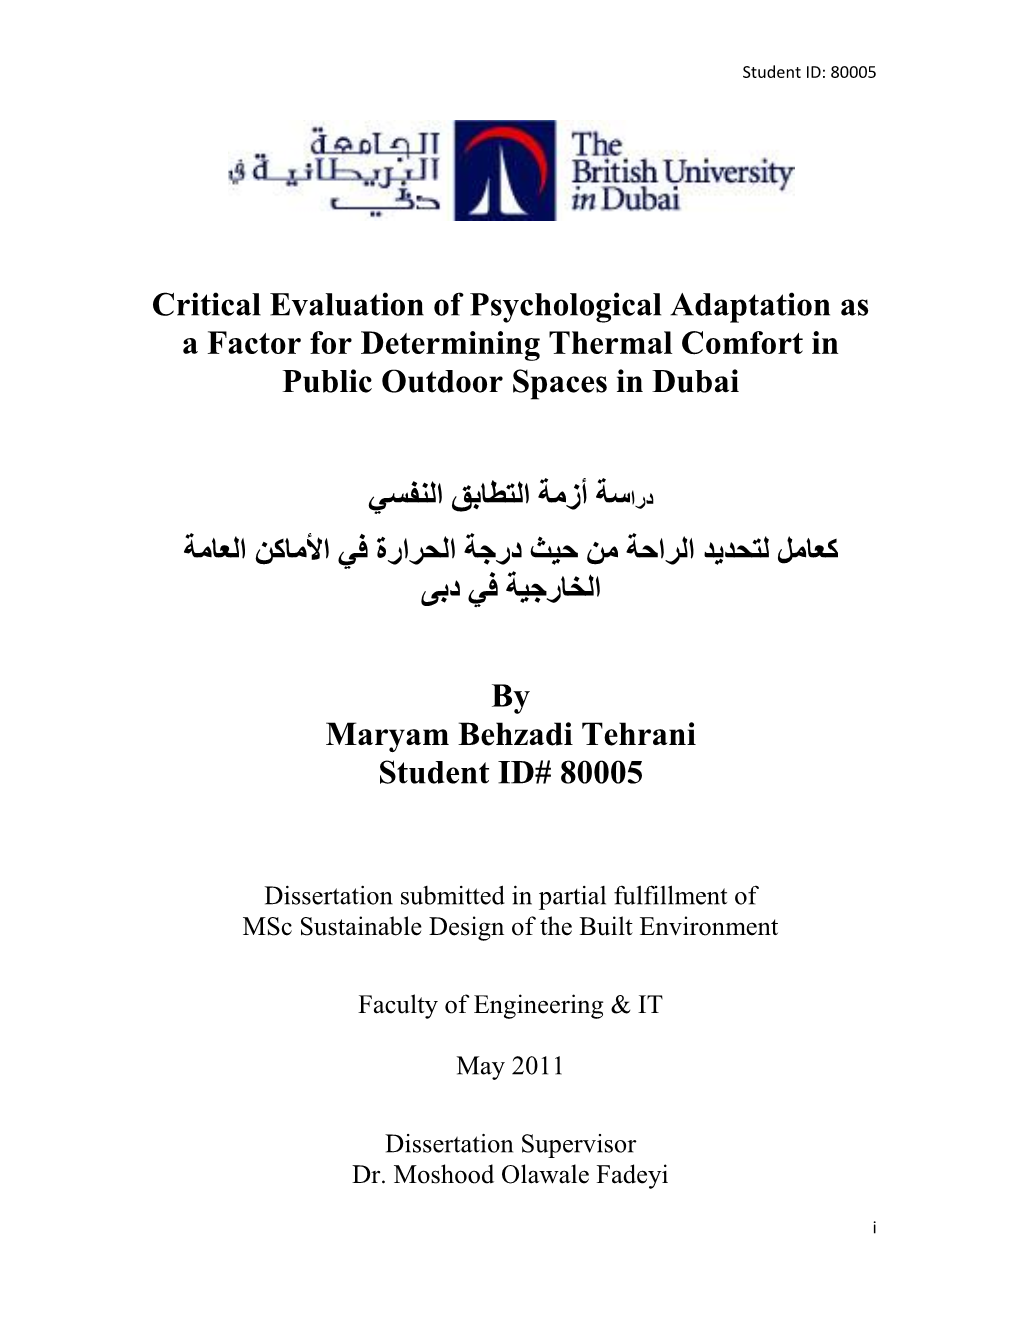 Critical Evaluation of Psychological Adaptation As a Factor for Determining Thermal Comfort in Public Outdoor Spaces in Dubai